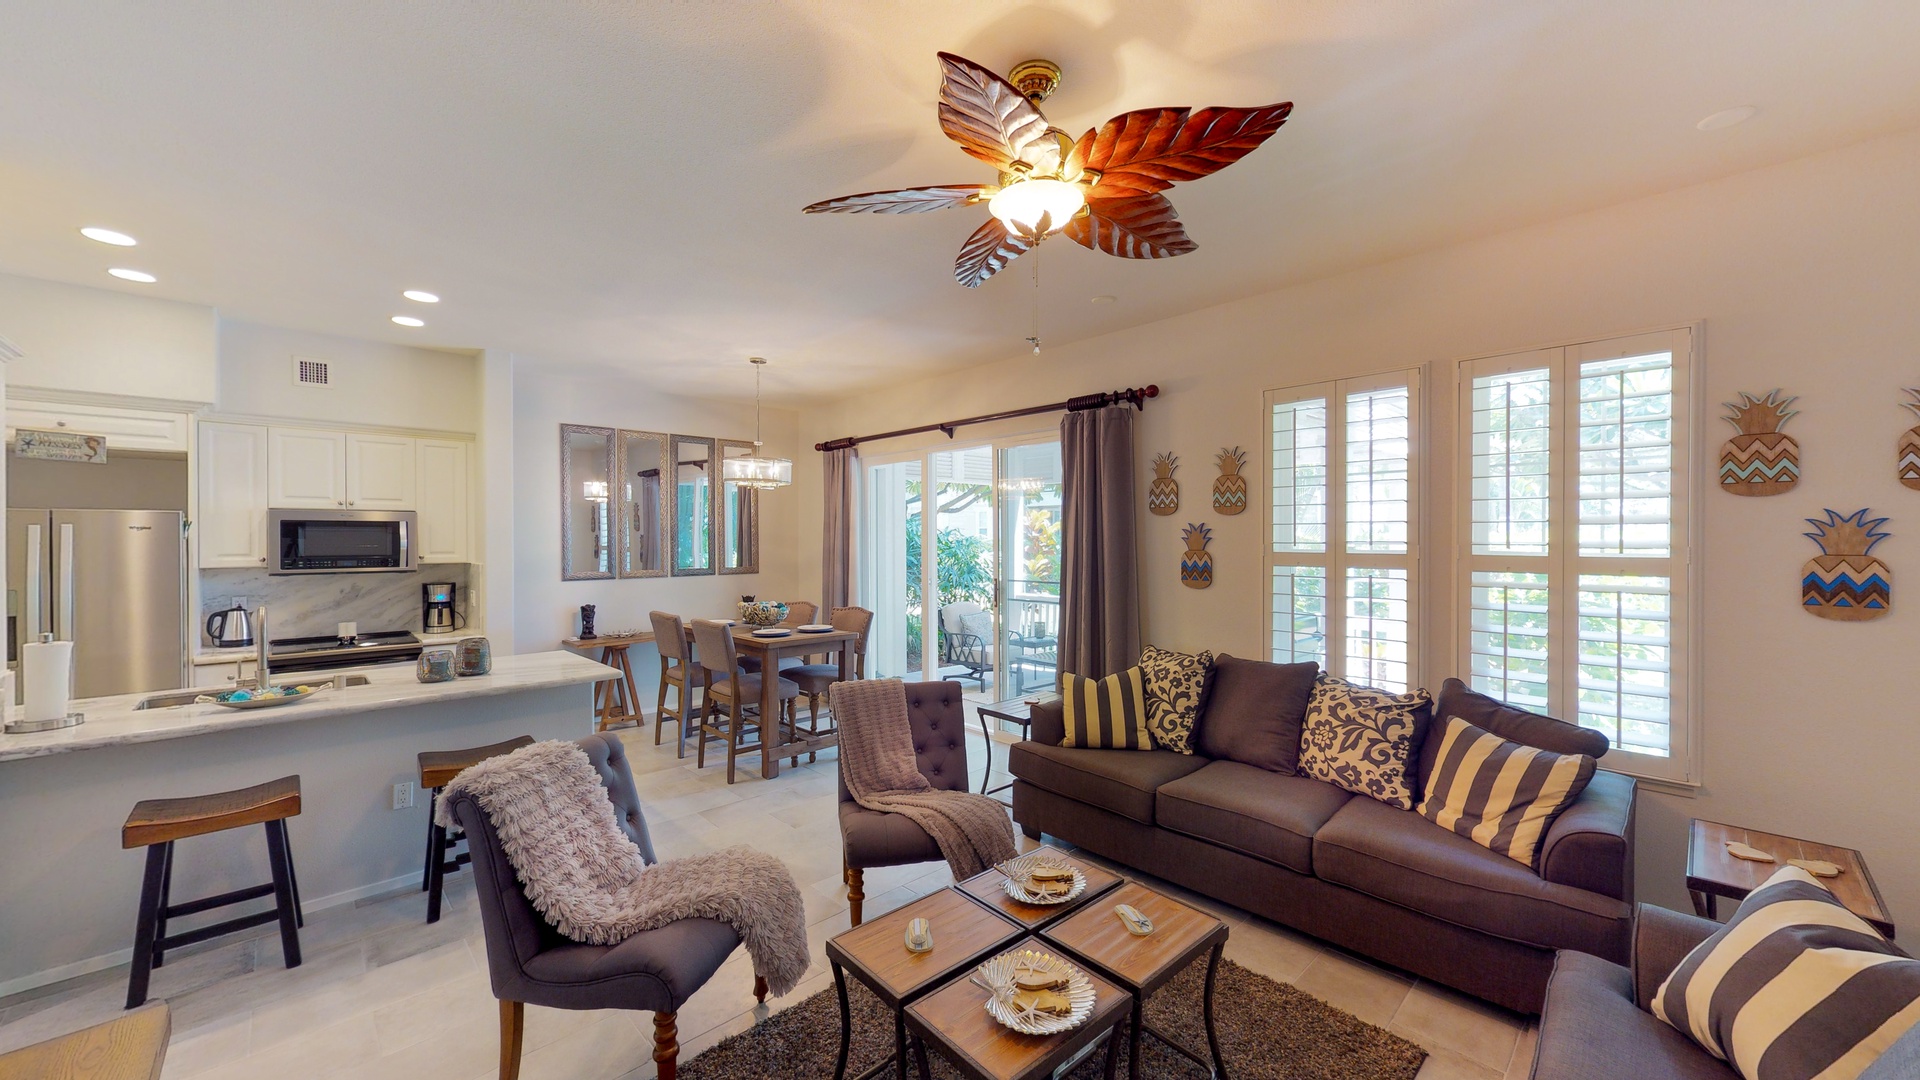 Kapolei Vacation Rentals, Coconut Plantation 1222-3 - The open floor plan creates an easy living space.